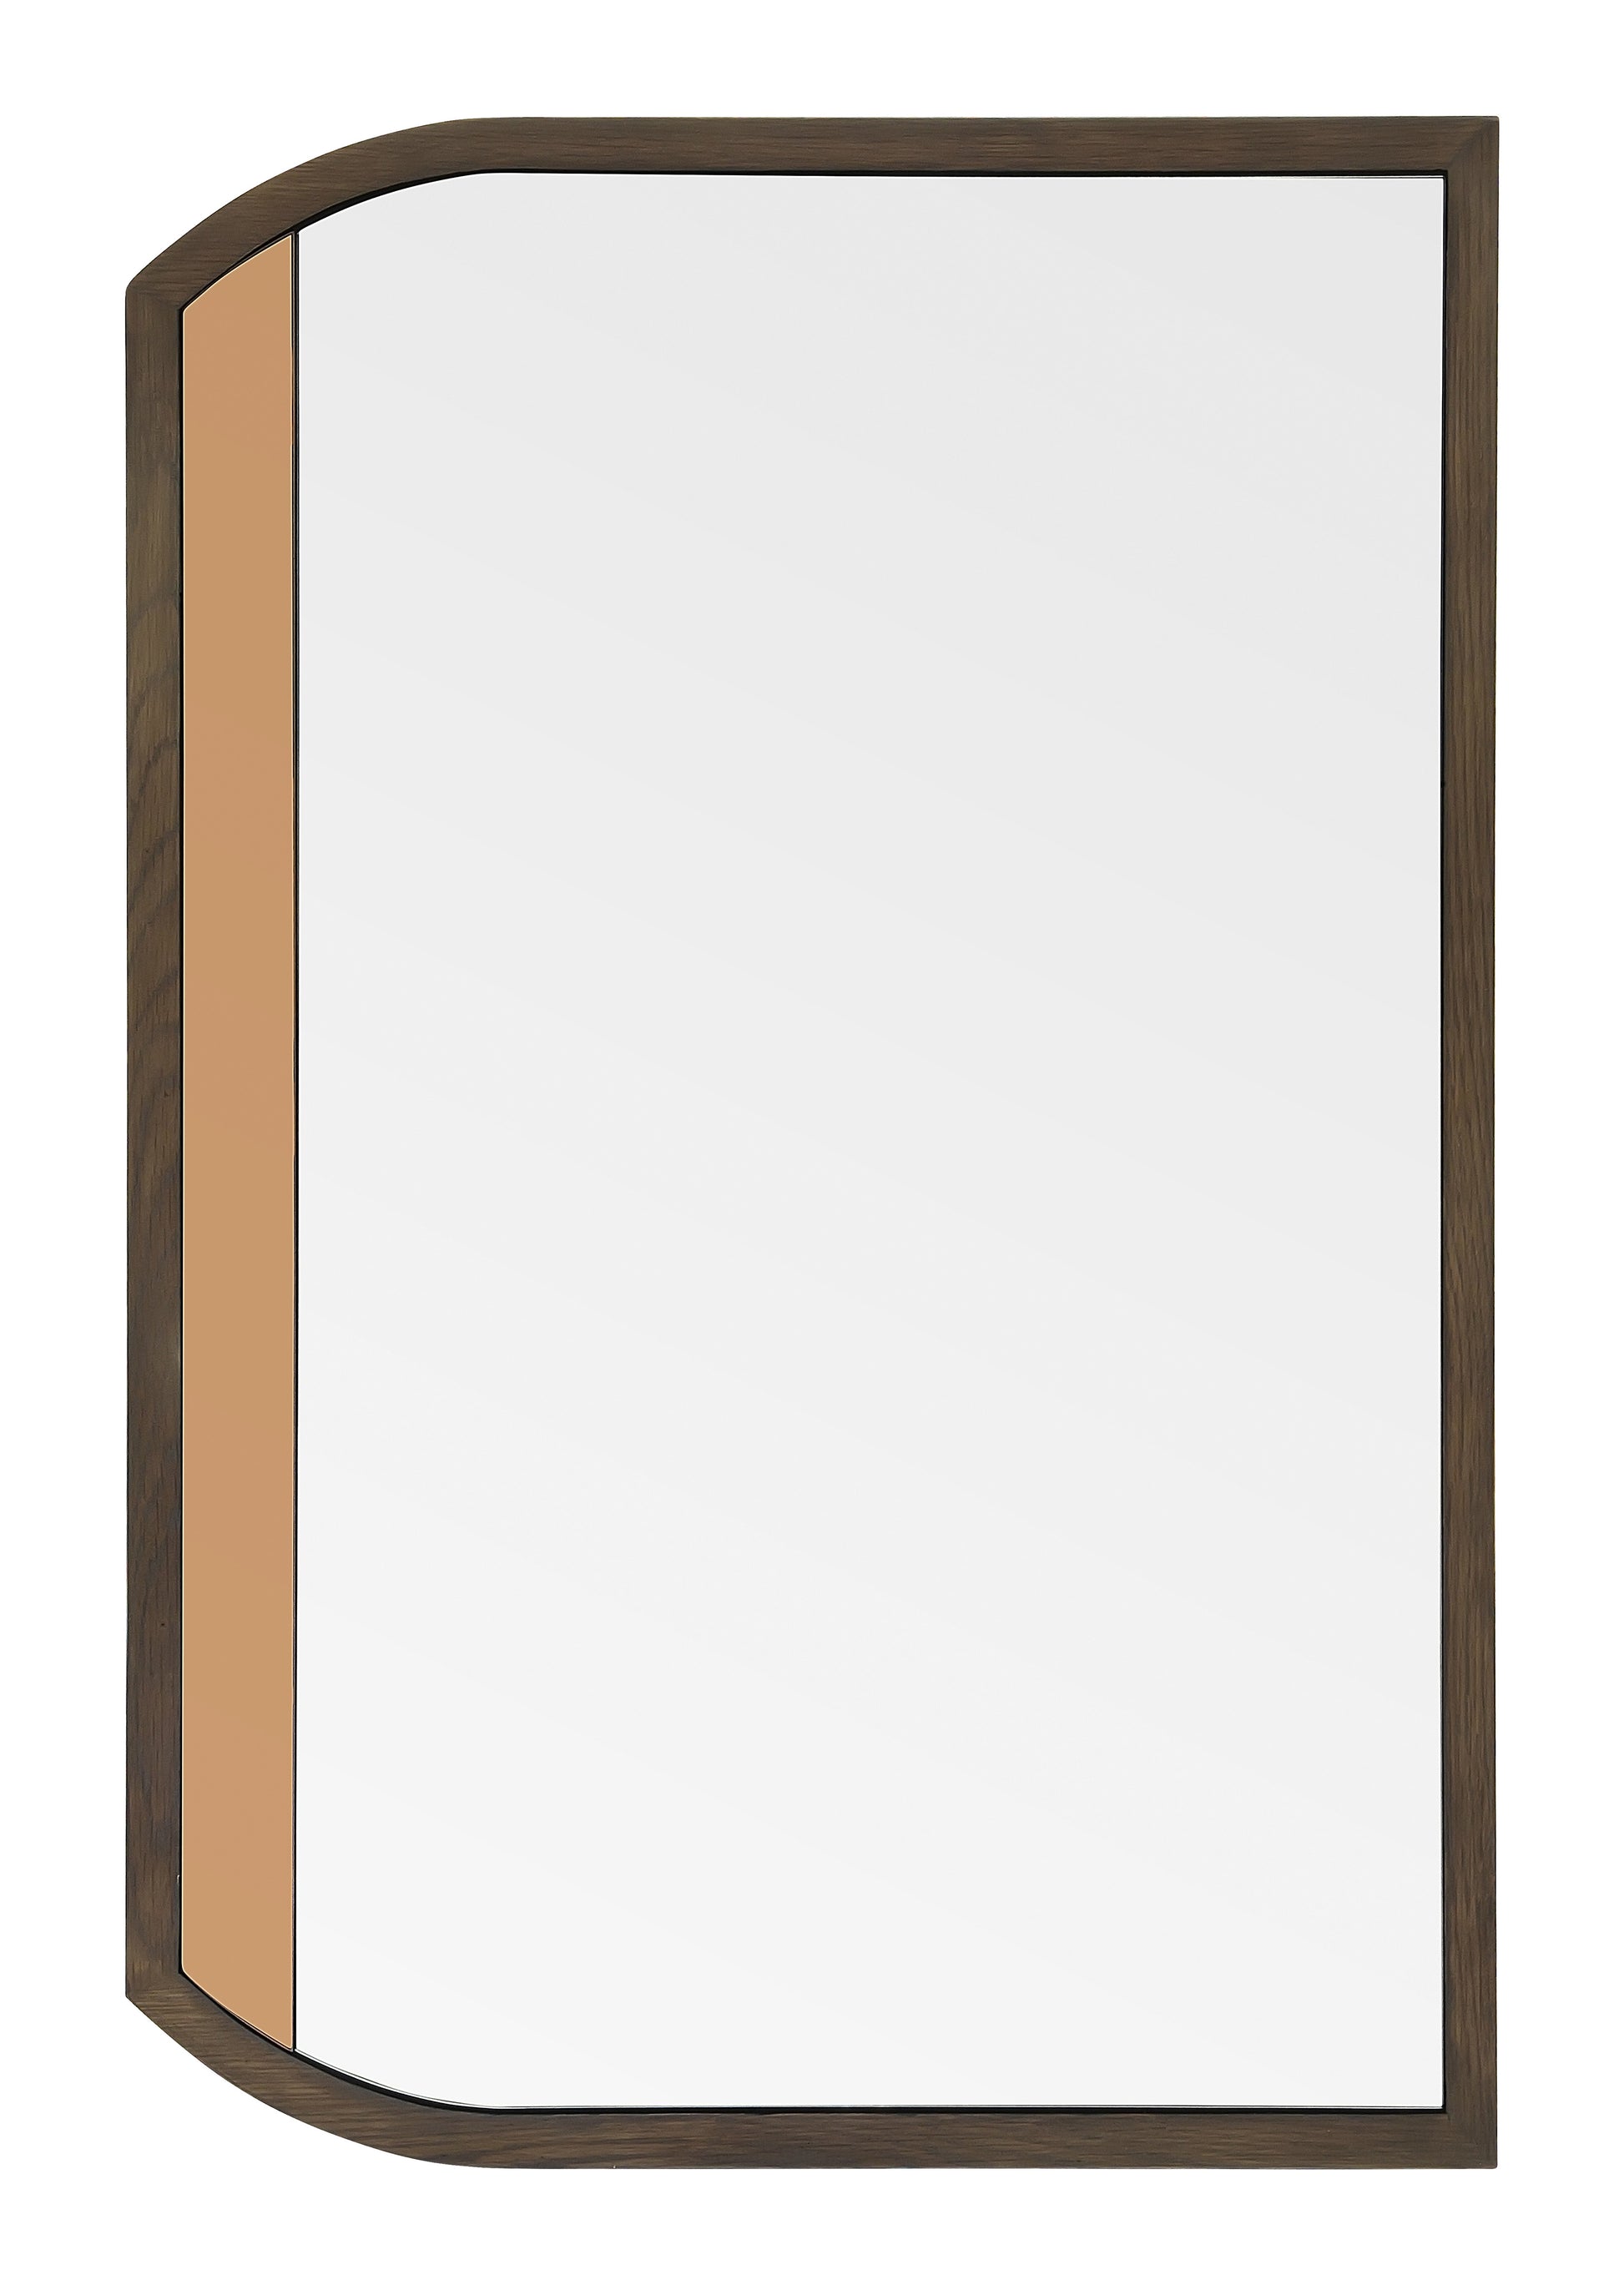 Stained wood frame and custom colored mirror 